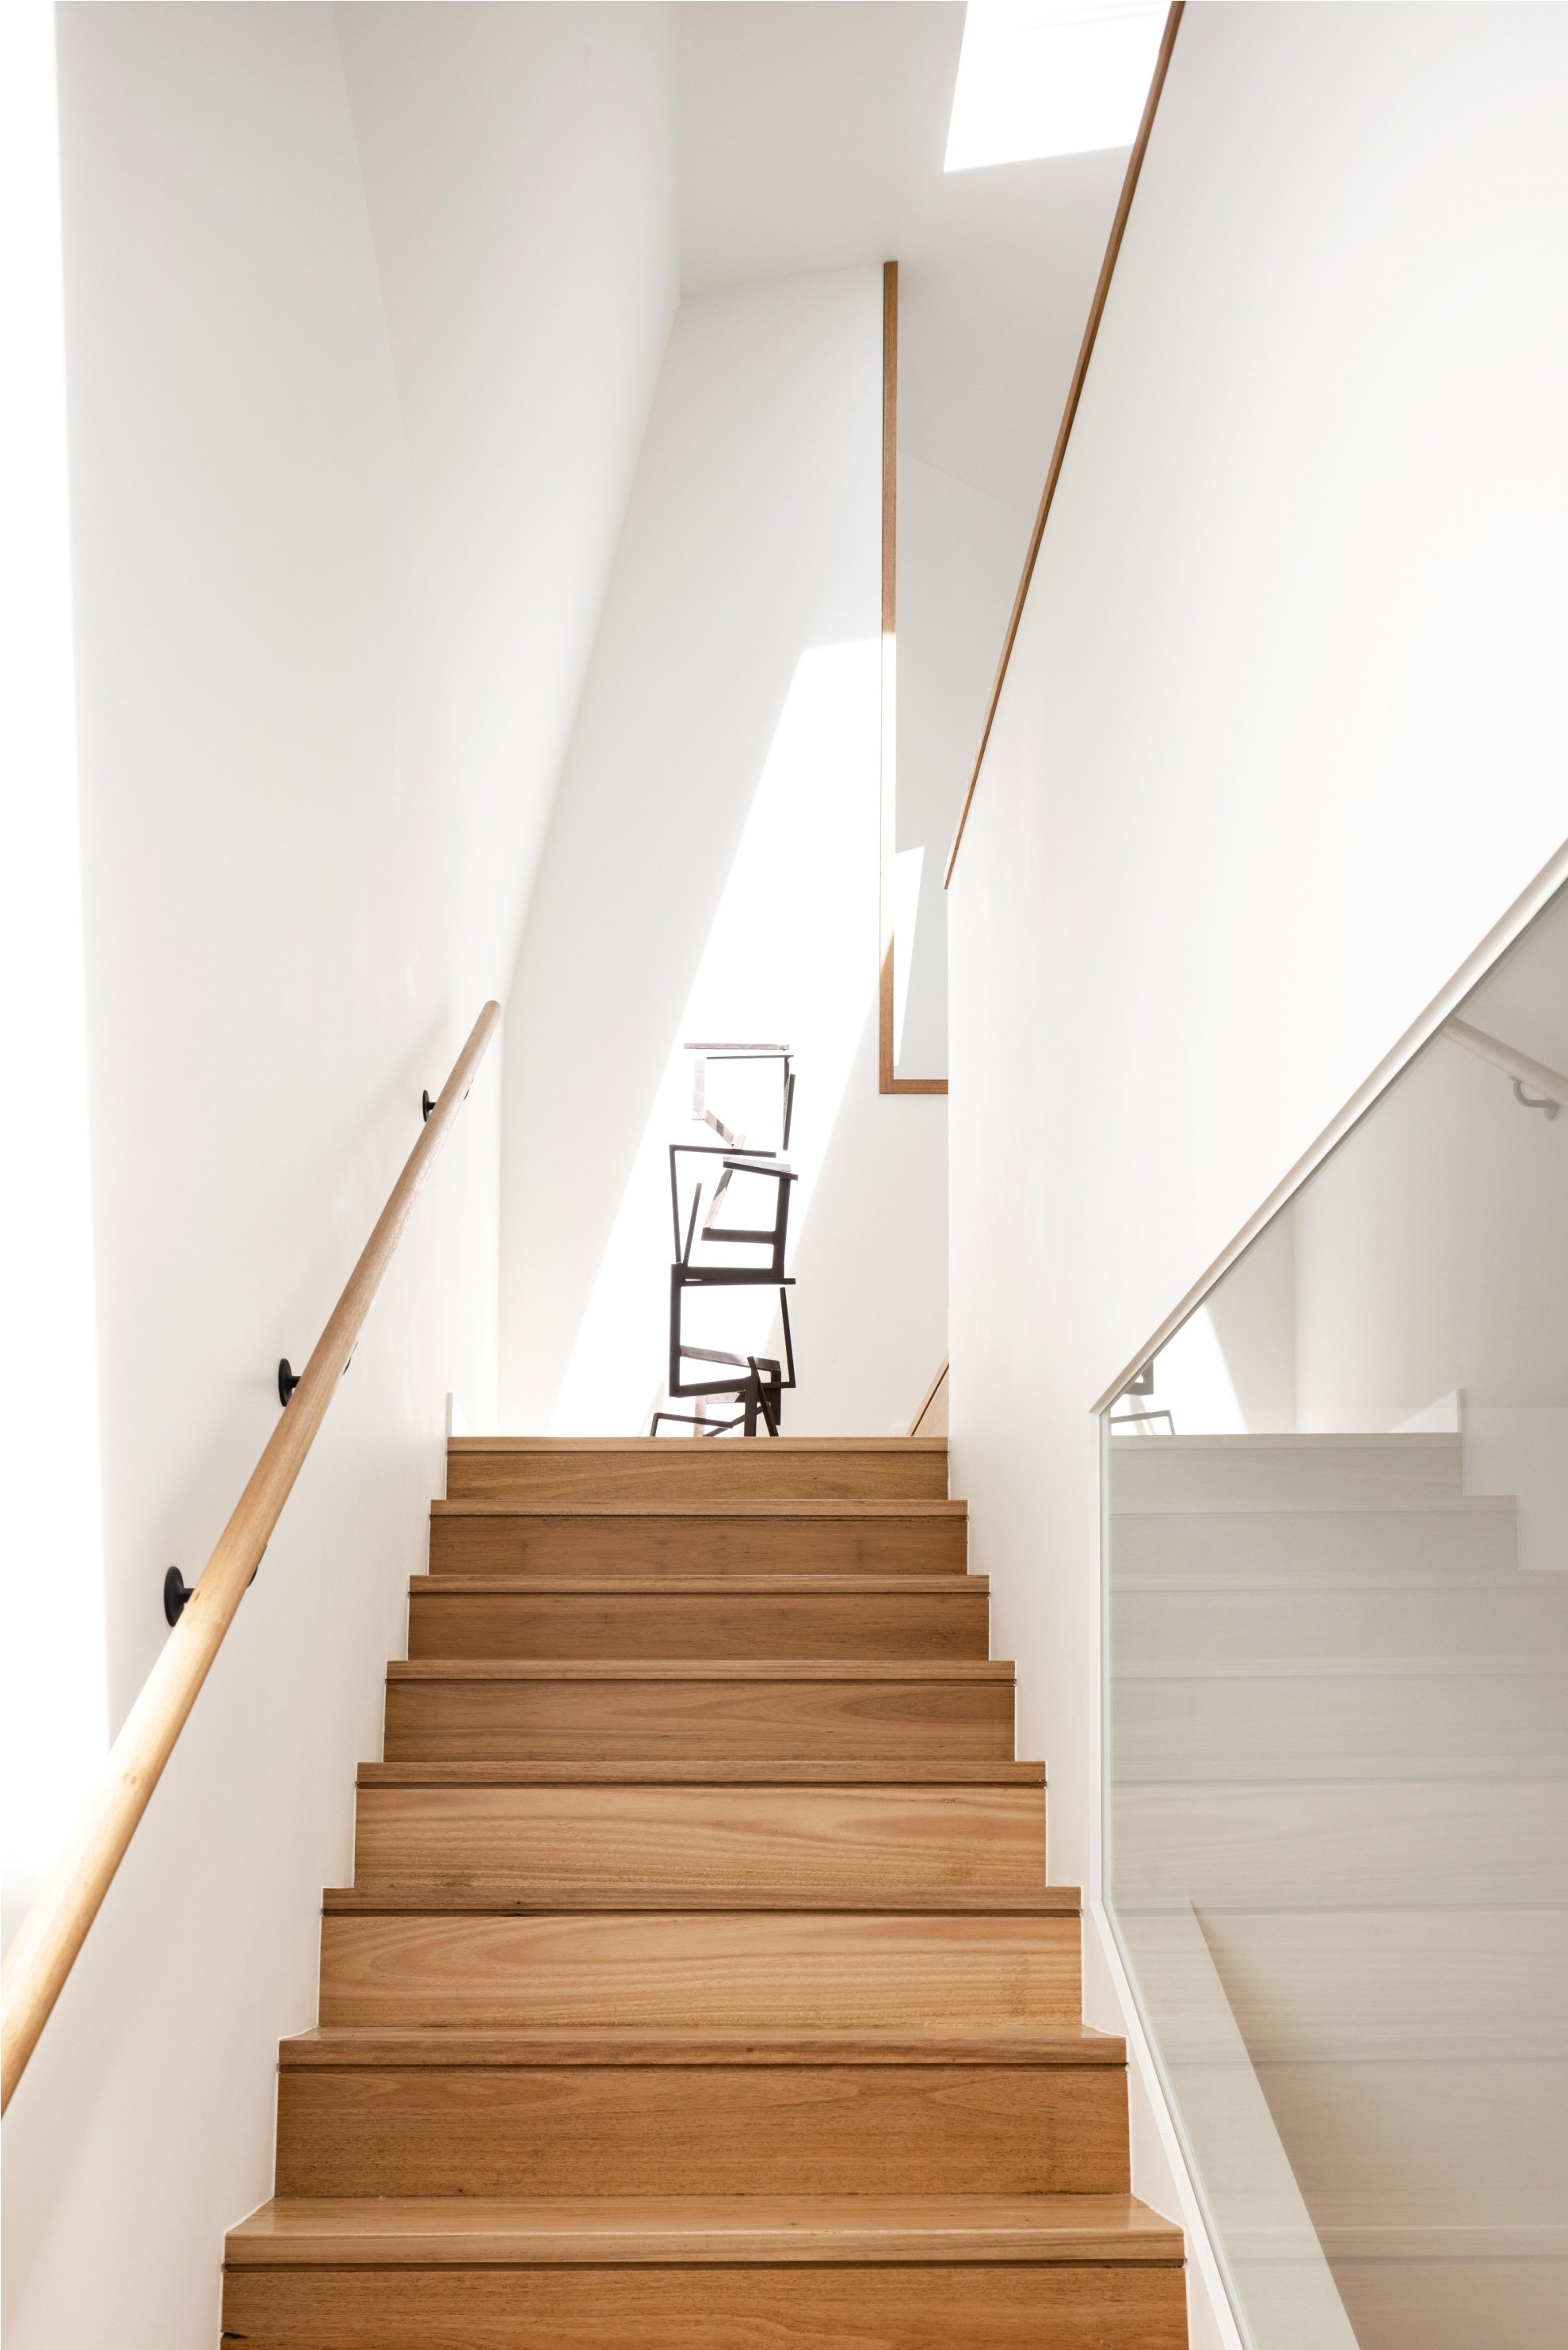 Nick Bell Architects CDC House Stair.jpg